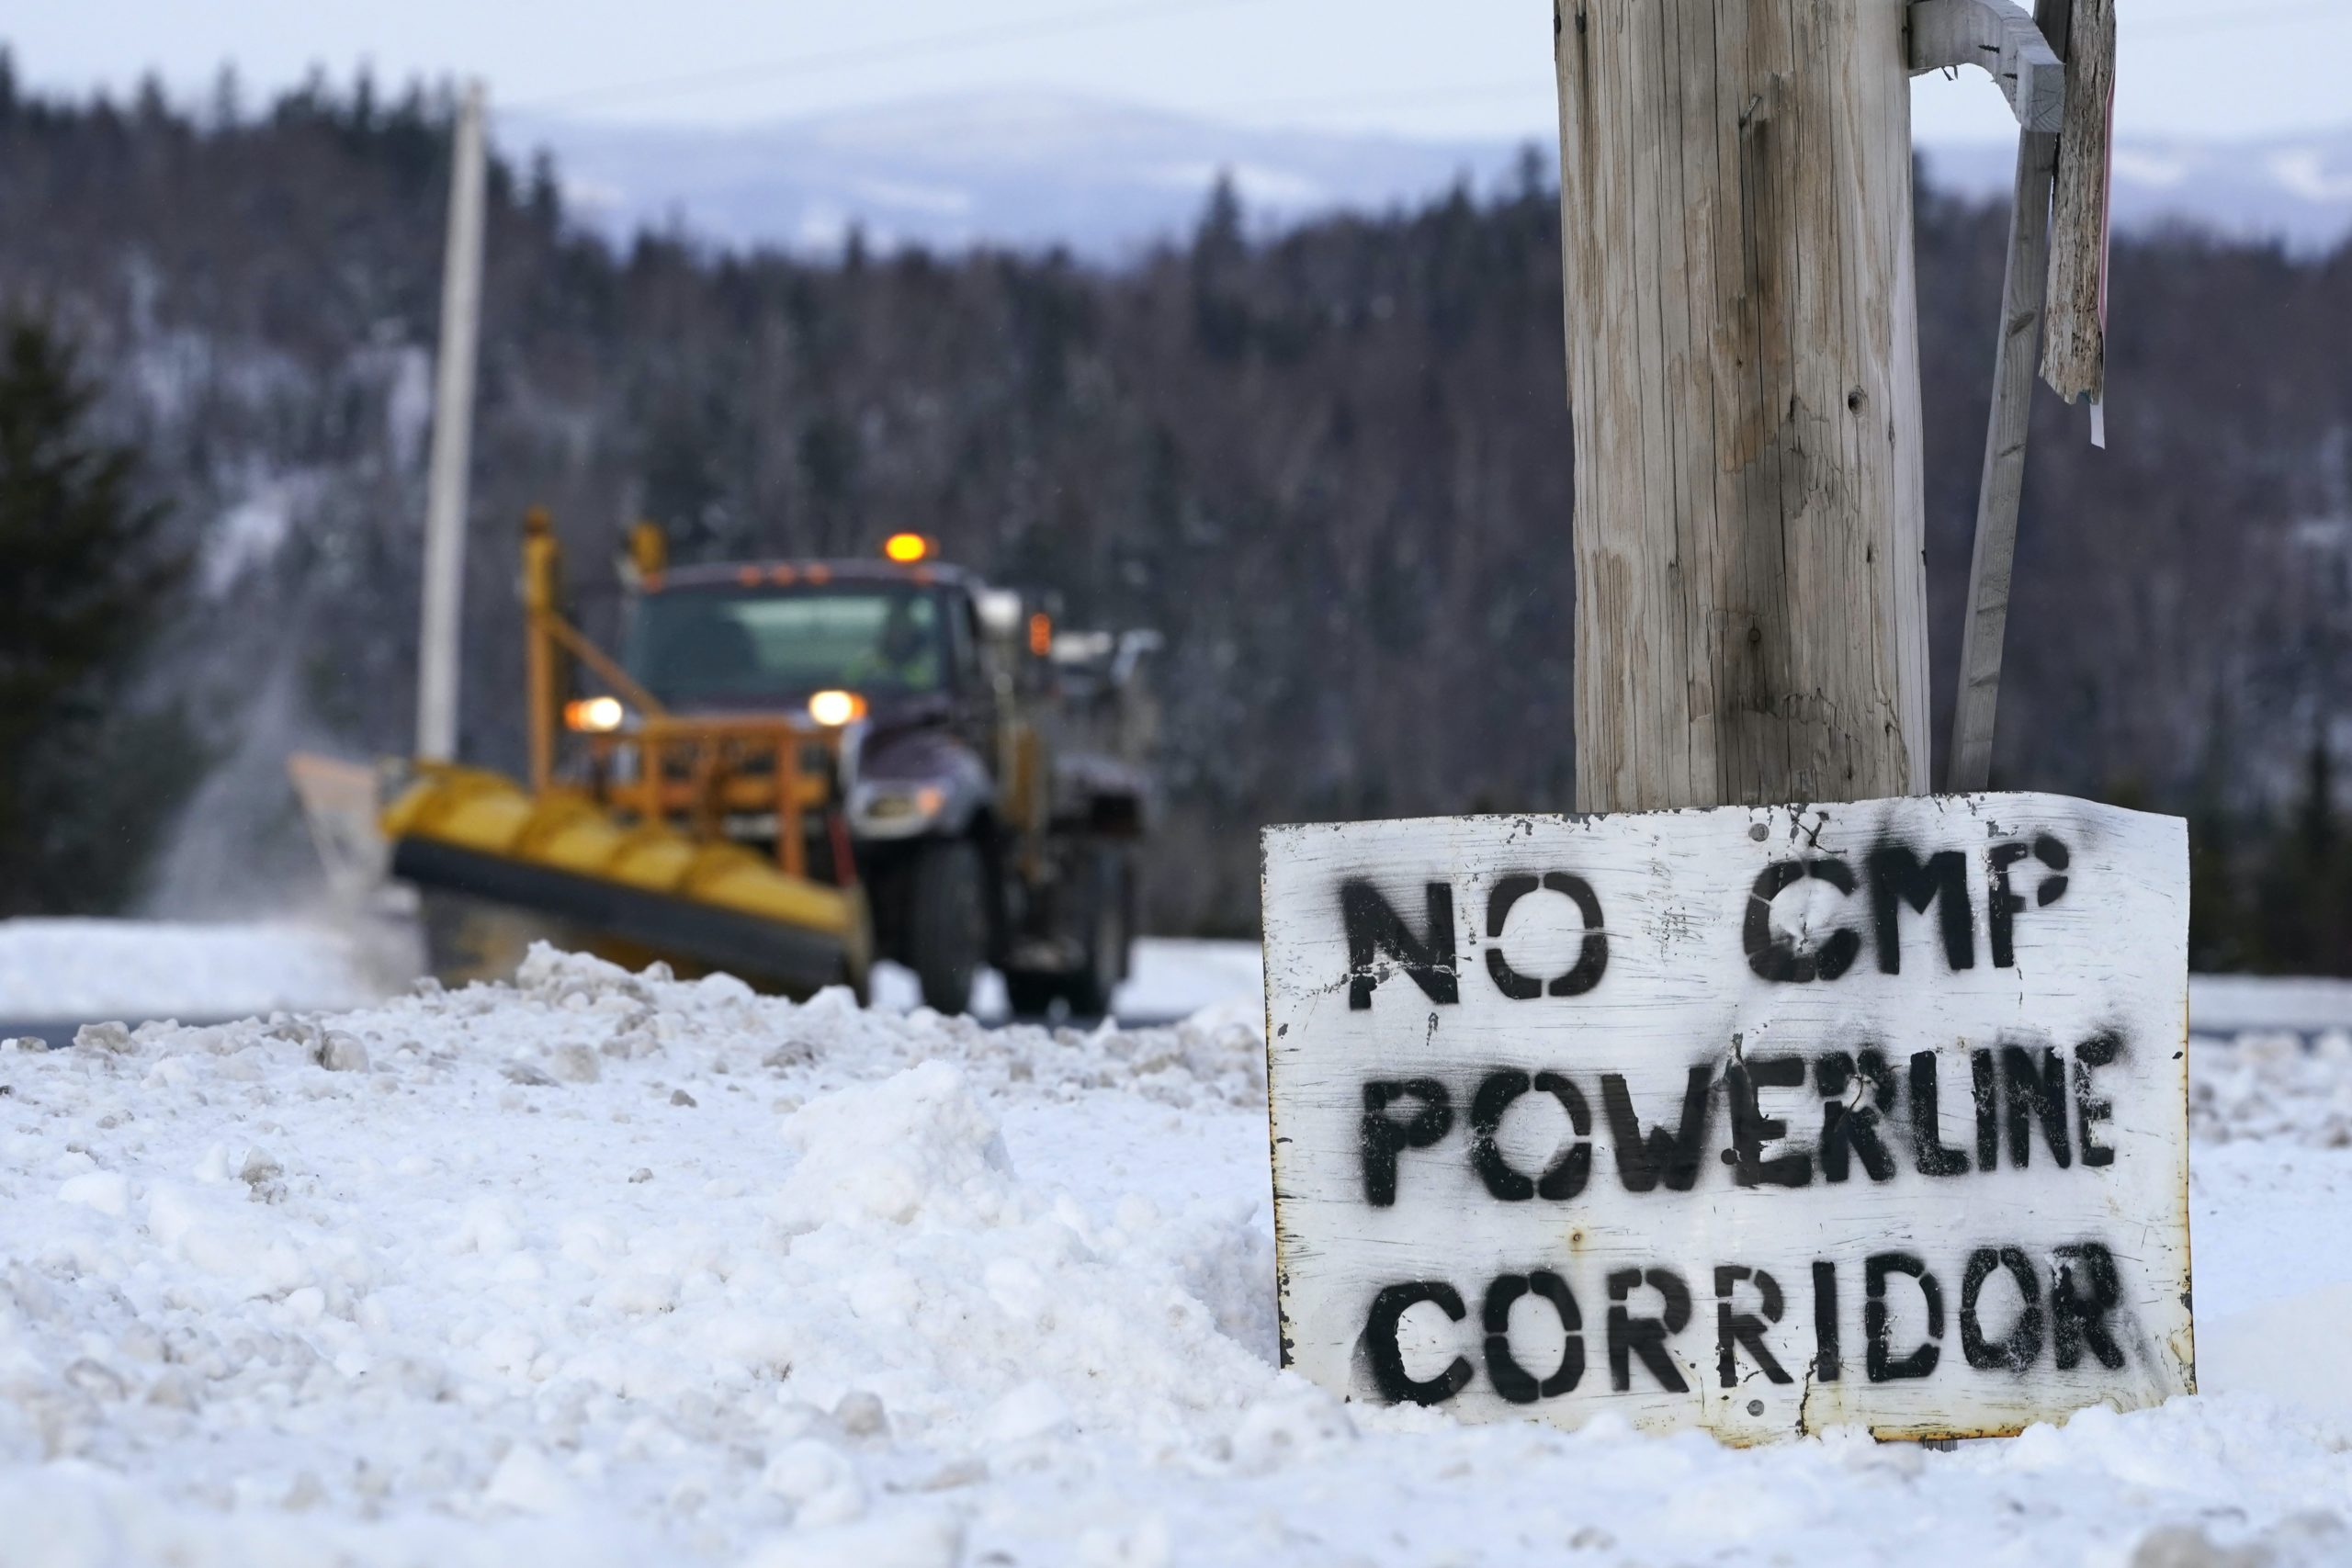 A sign in protest of Central Maine Power's controversial hydropower transmission corridor is displayed along Rte. 201 near The Forks, Maine, on Feb. 9, 2021.